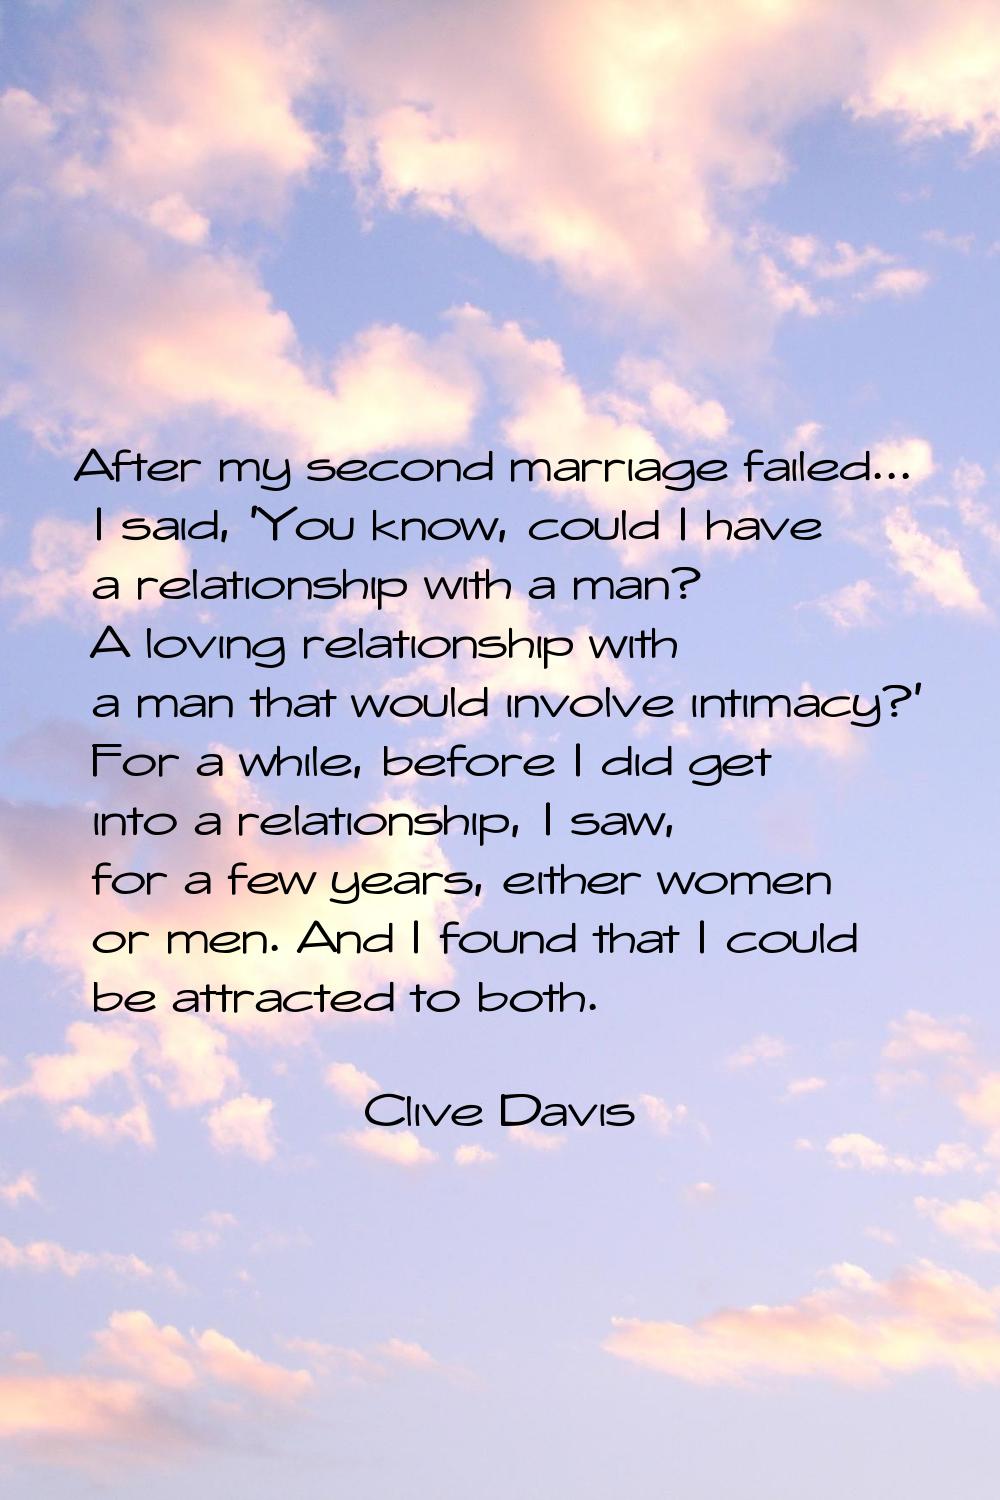 After my second marriage failed... I said, 'You know, could I have a relationship with a man? A lov